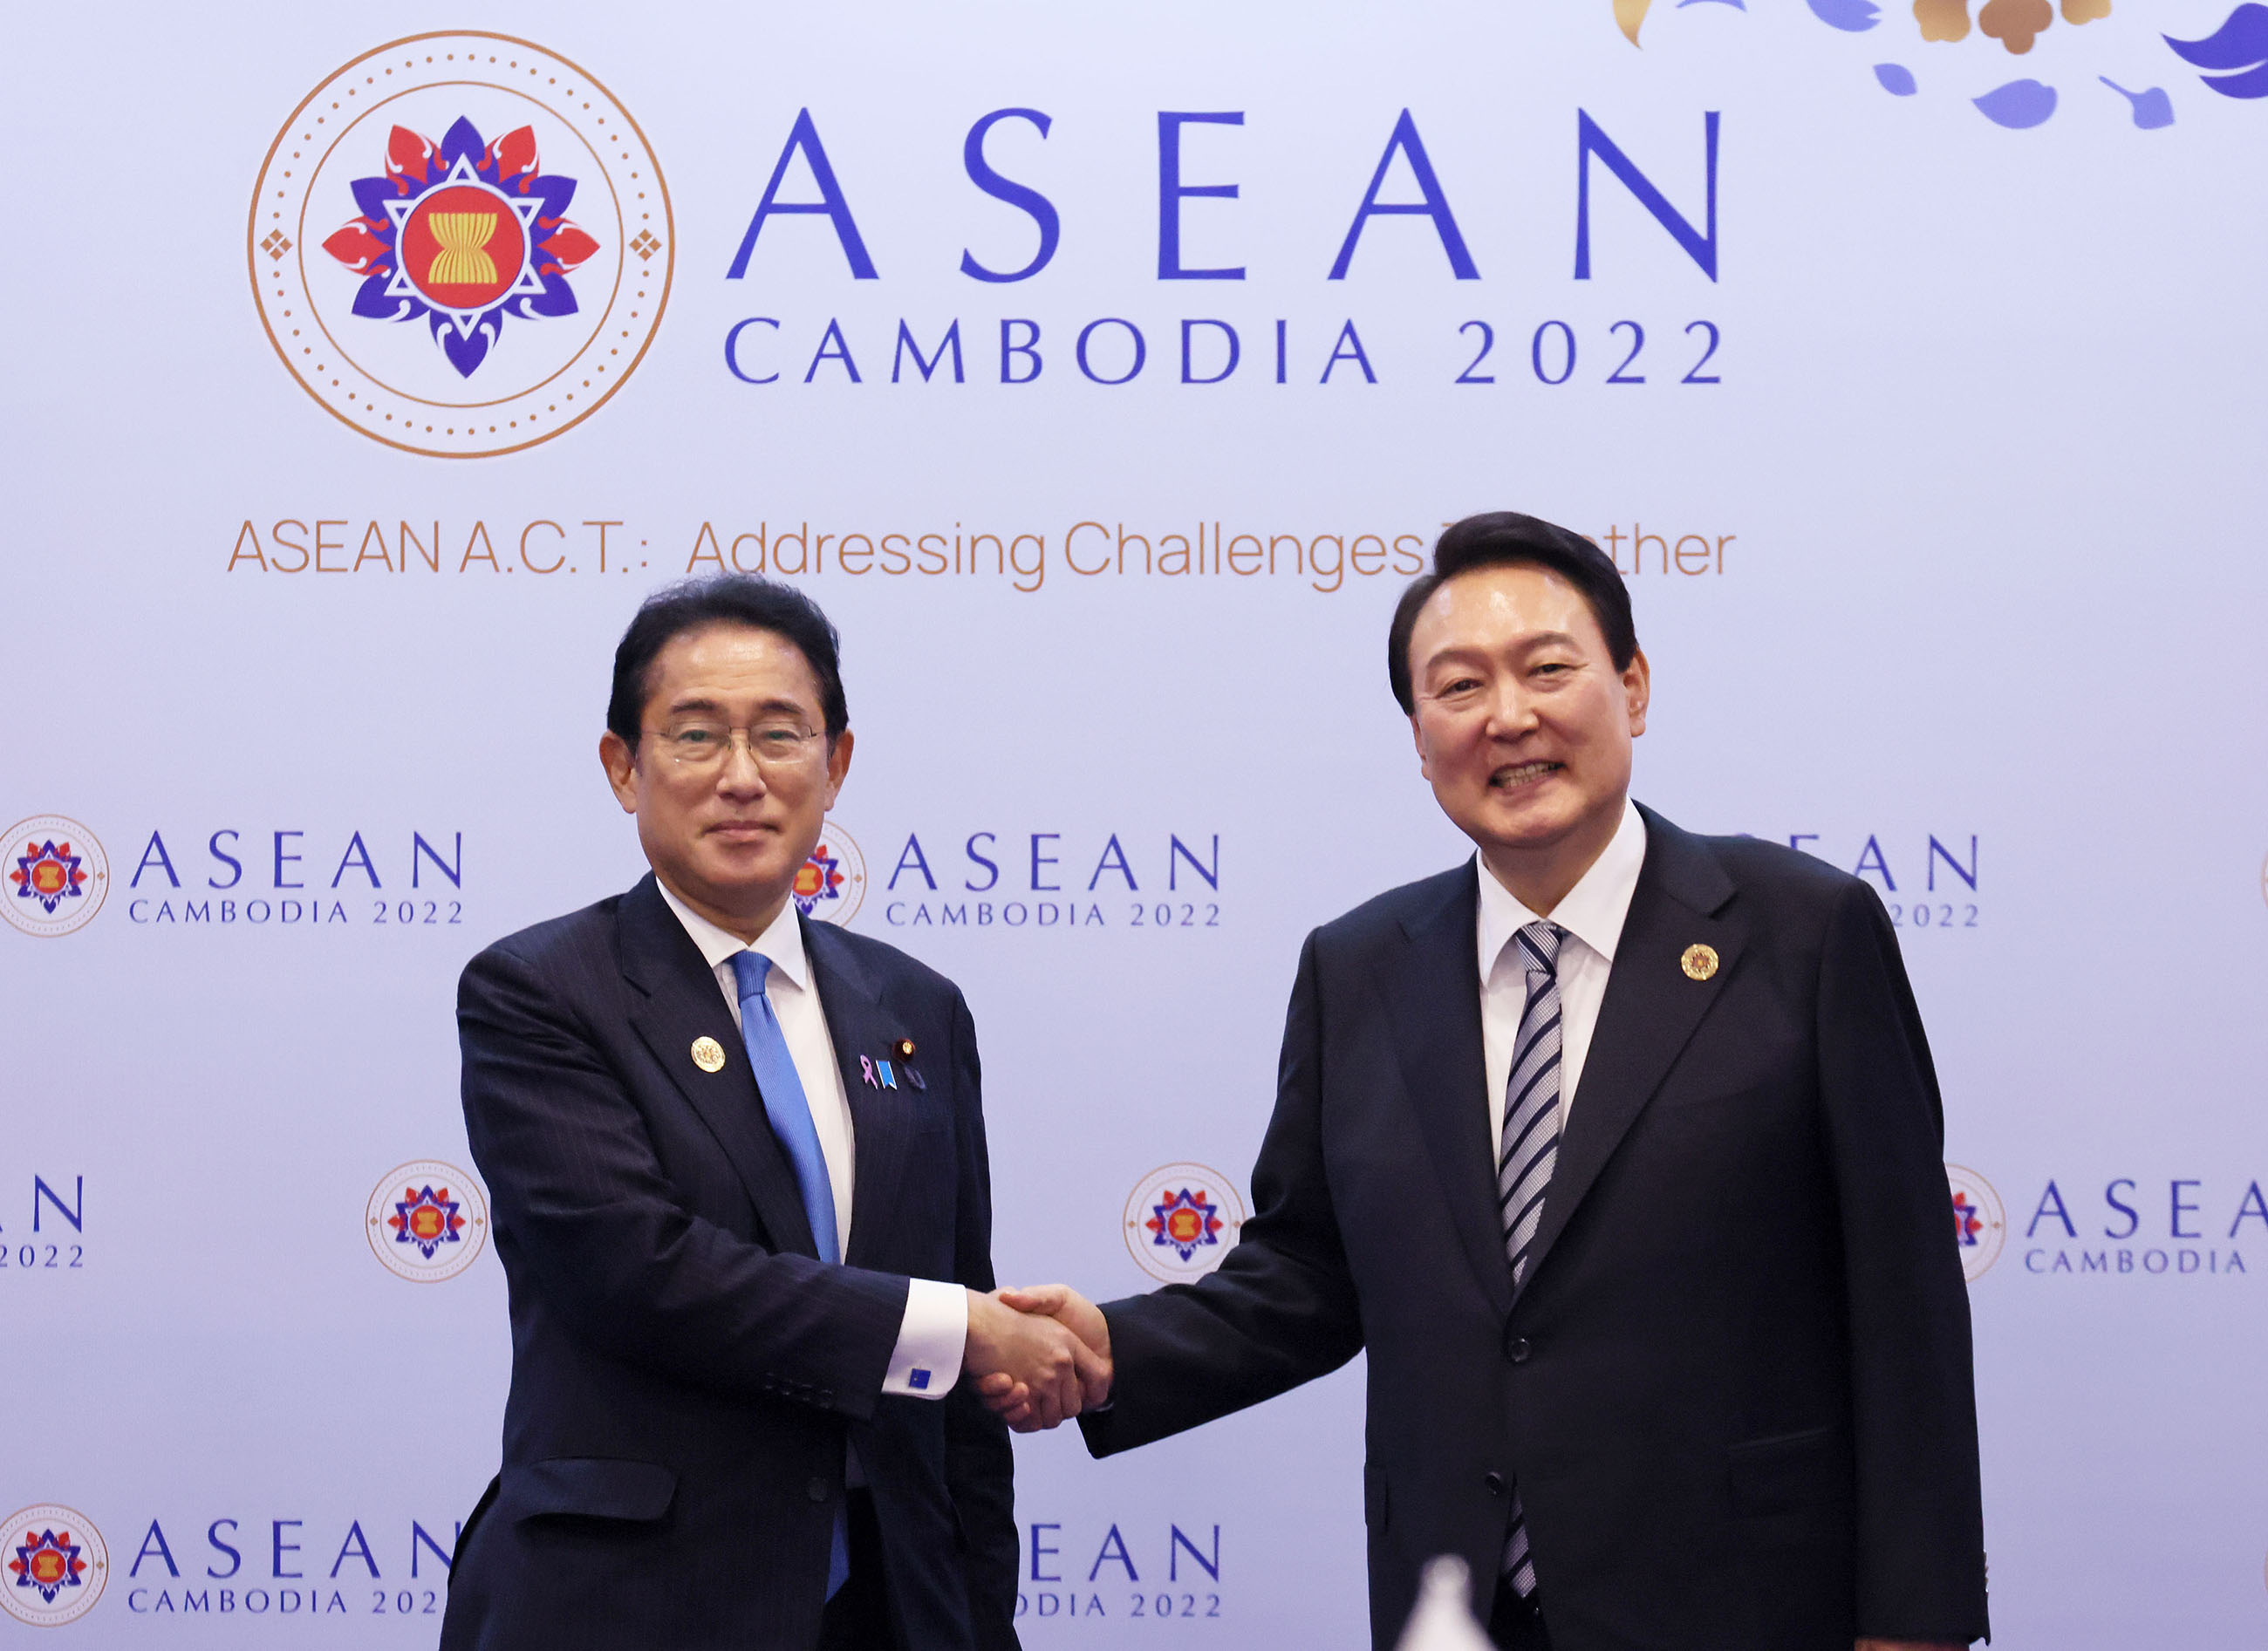 ASEAN-related Summit Meetings and Other Summit Meetings: Second Day